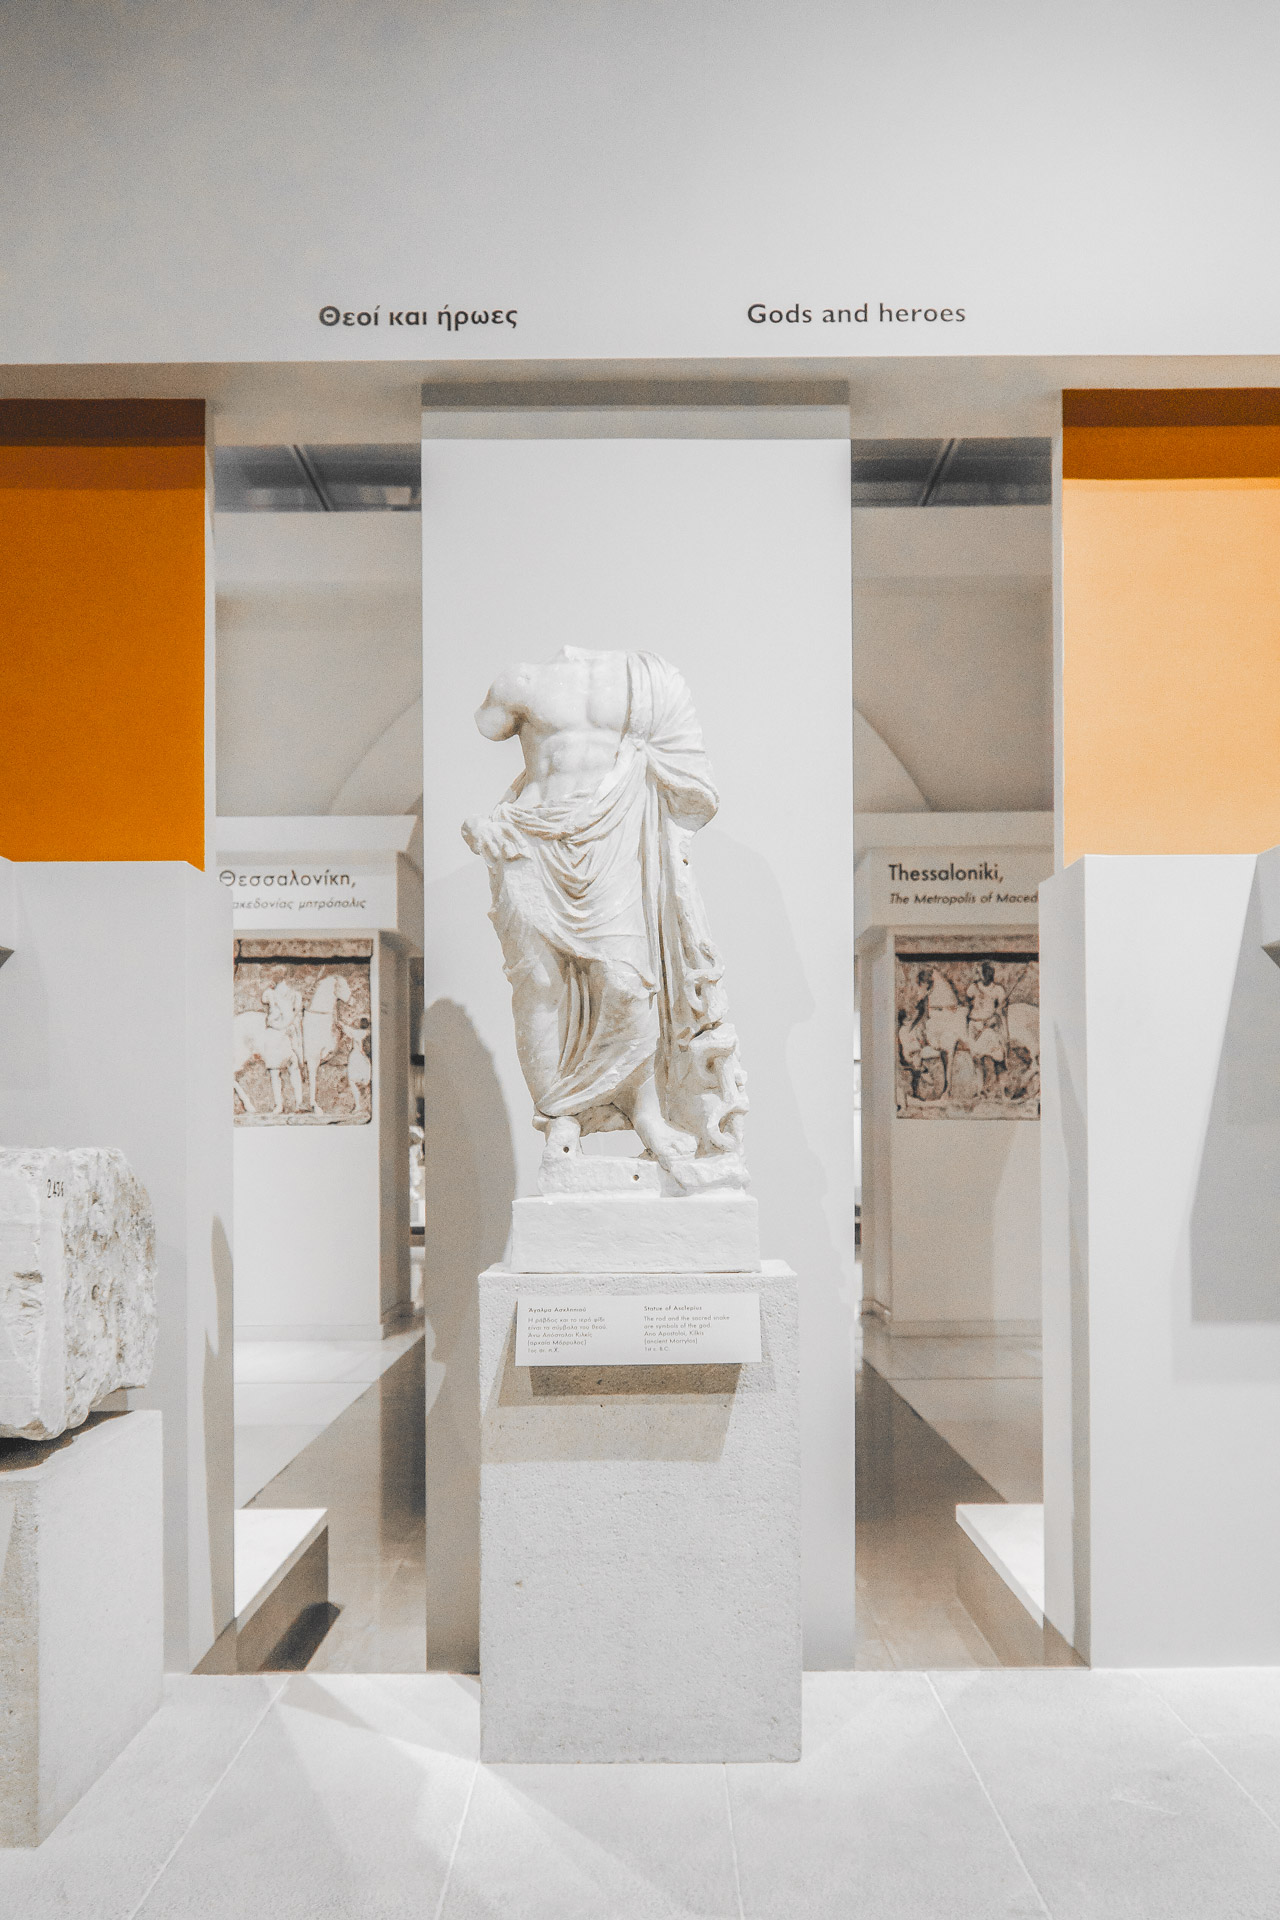 Explore extraordinary statues and learn everything about ancient Macedonia